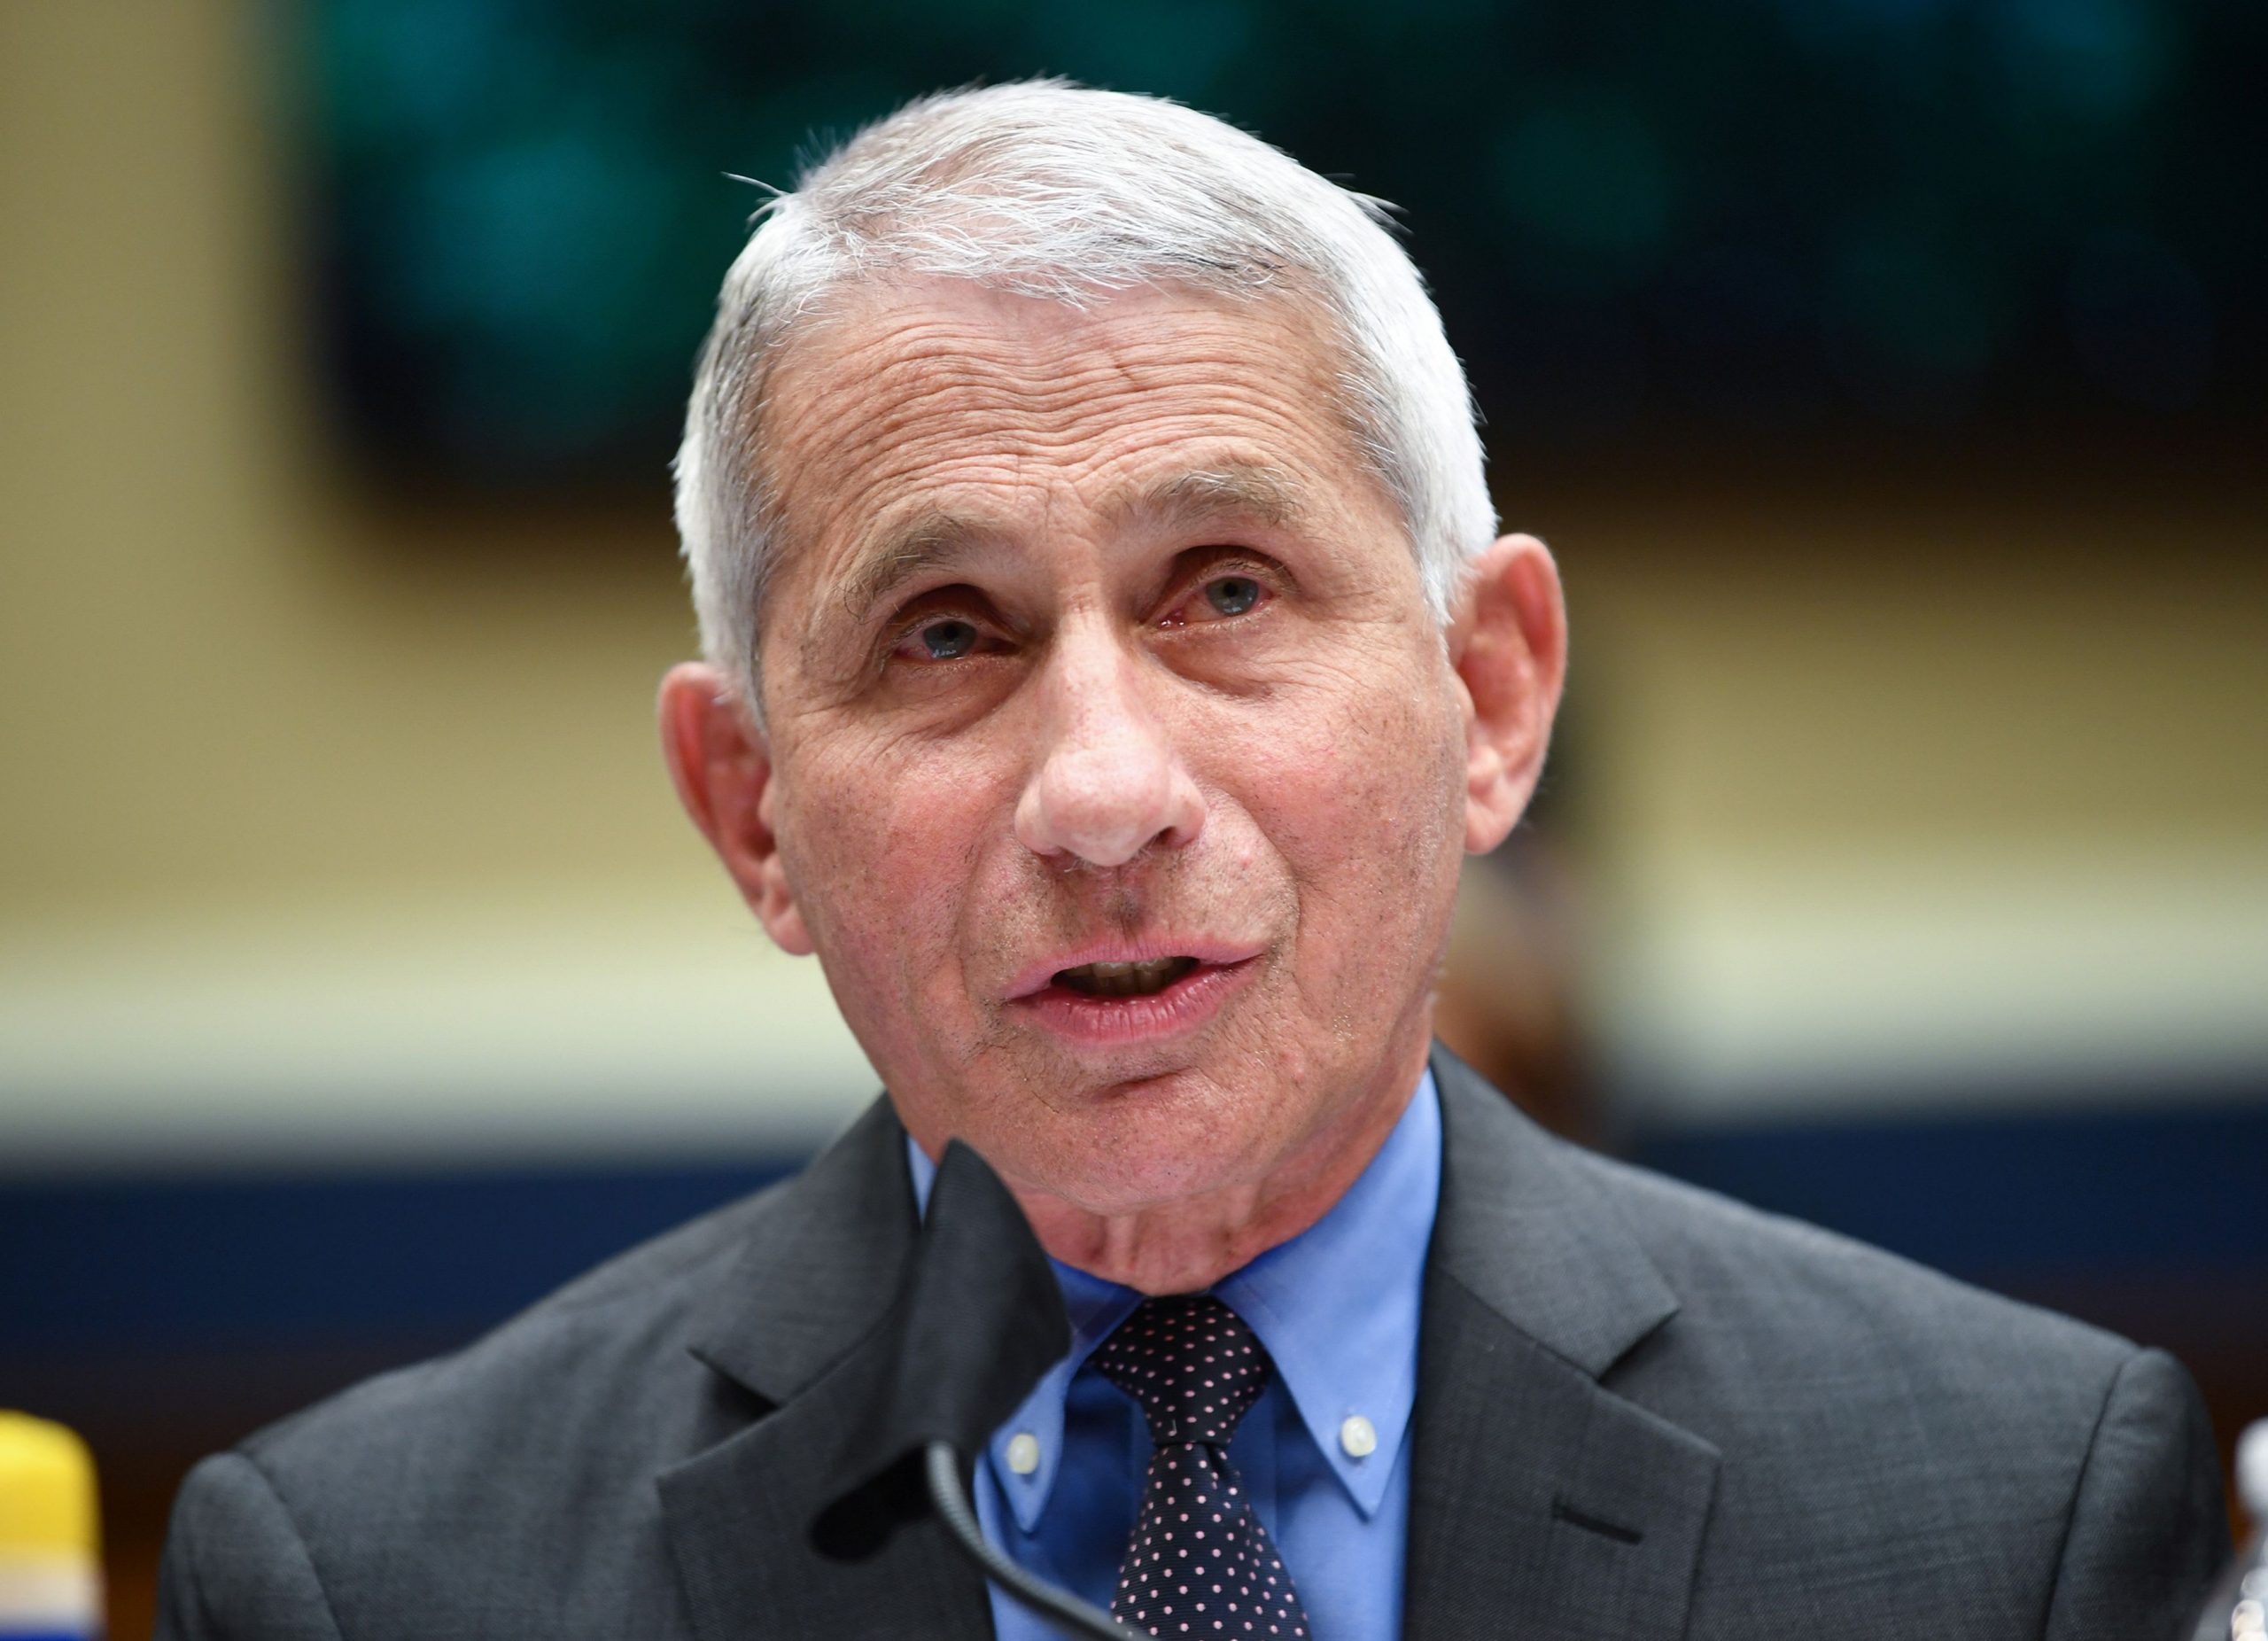 Dr. Fauci says his youngsters aren’t coming residence for Thanksgiving to remain secure from coronavirus